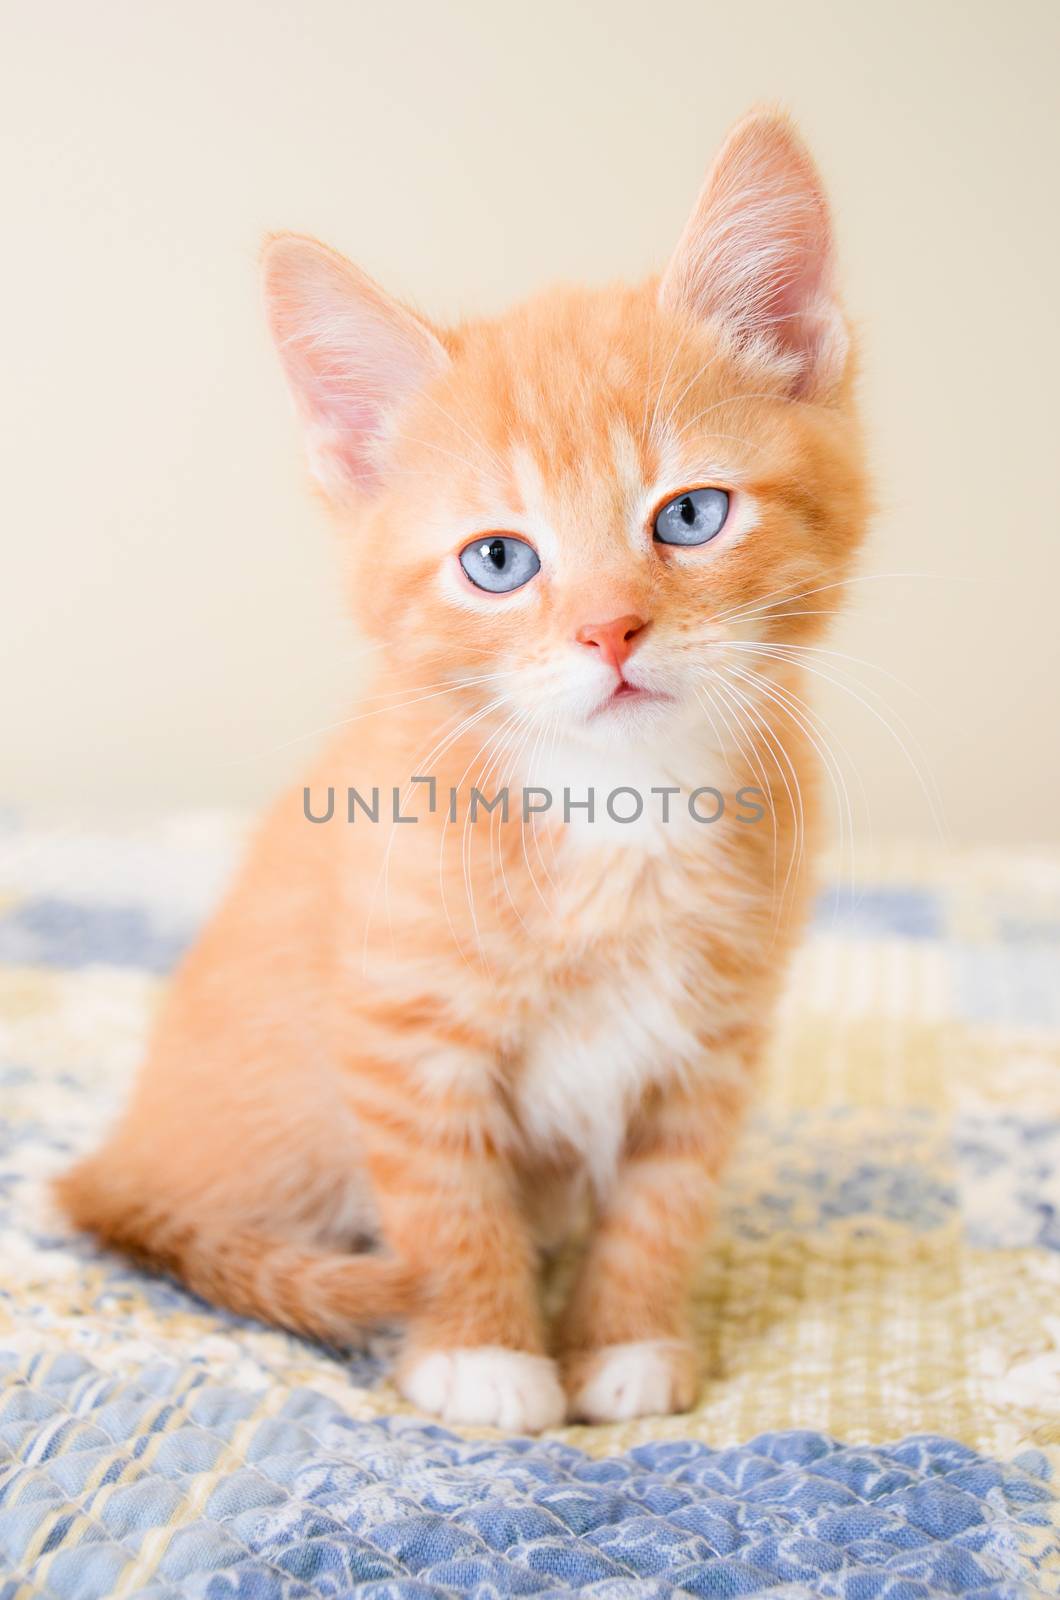 Cute orange kitten sitting on a blue and yellow quilt by dnsphotography